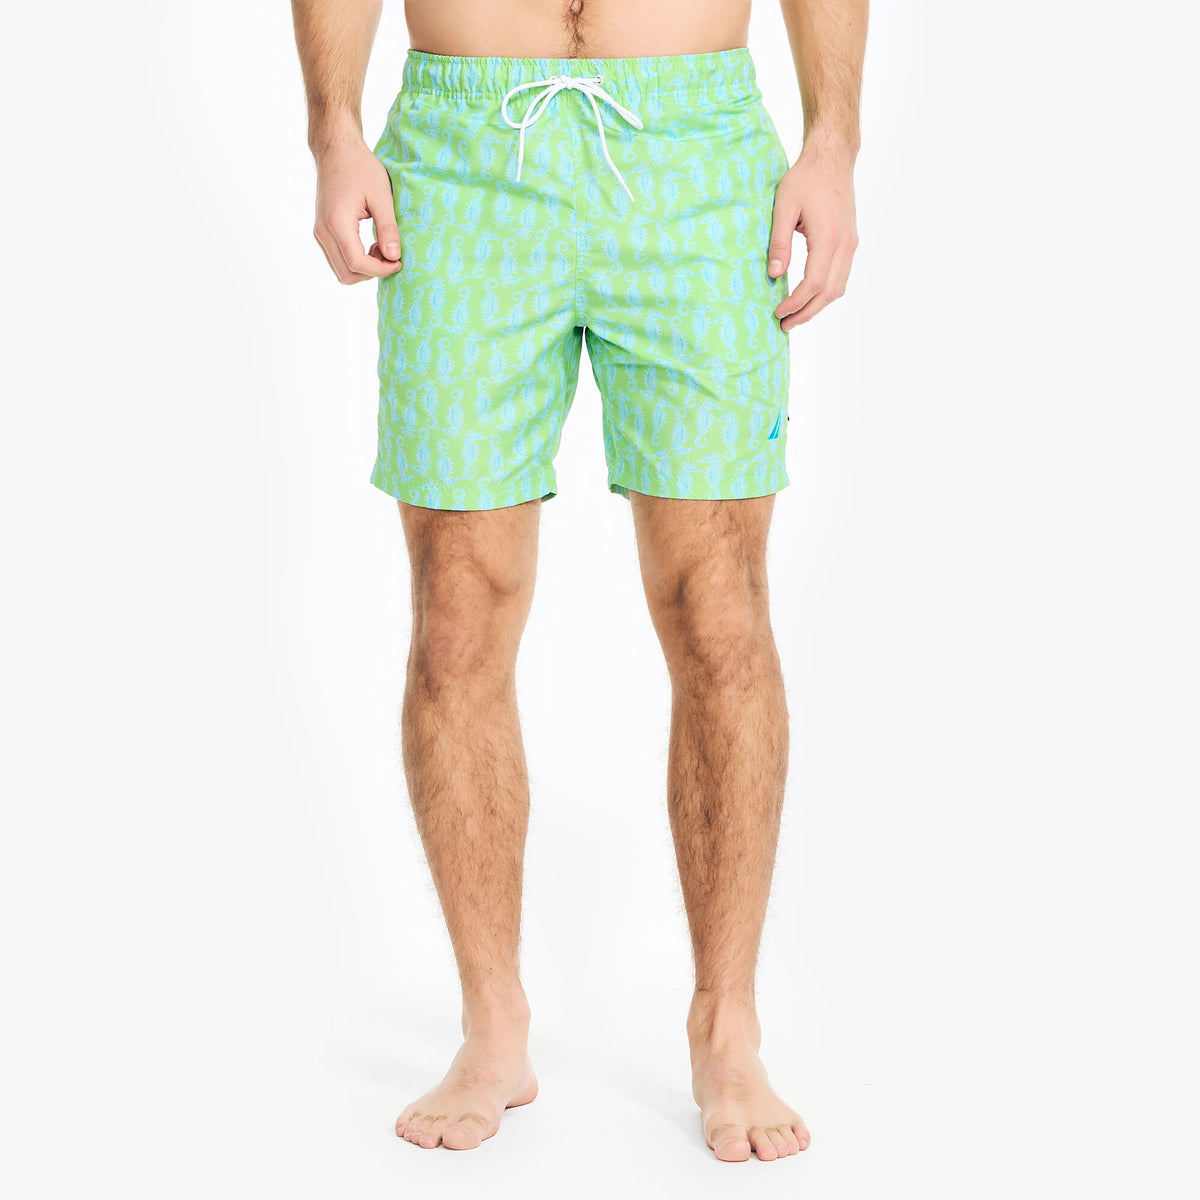 Nautica Men's Big & Tall Sustainably Crafted 8" Seahorse Print Swim Lime Surf